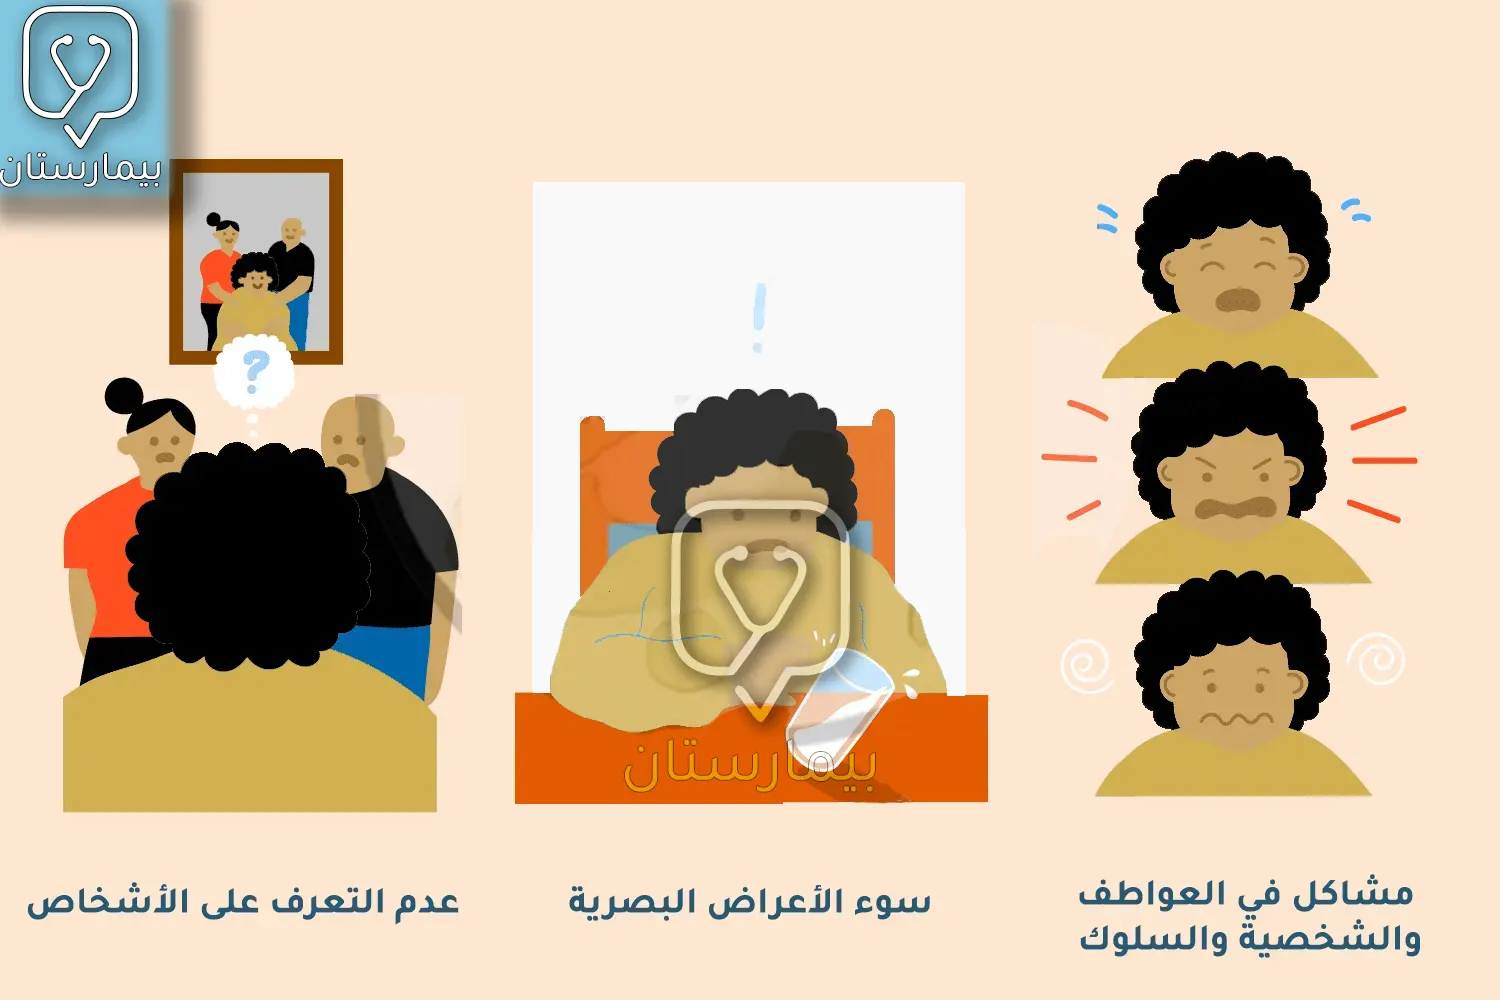 Image showing symptoms of Alzheimer's disease in the third stage